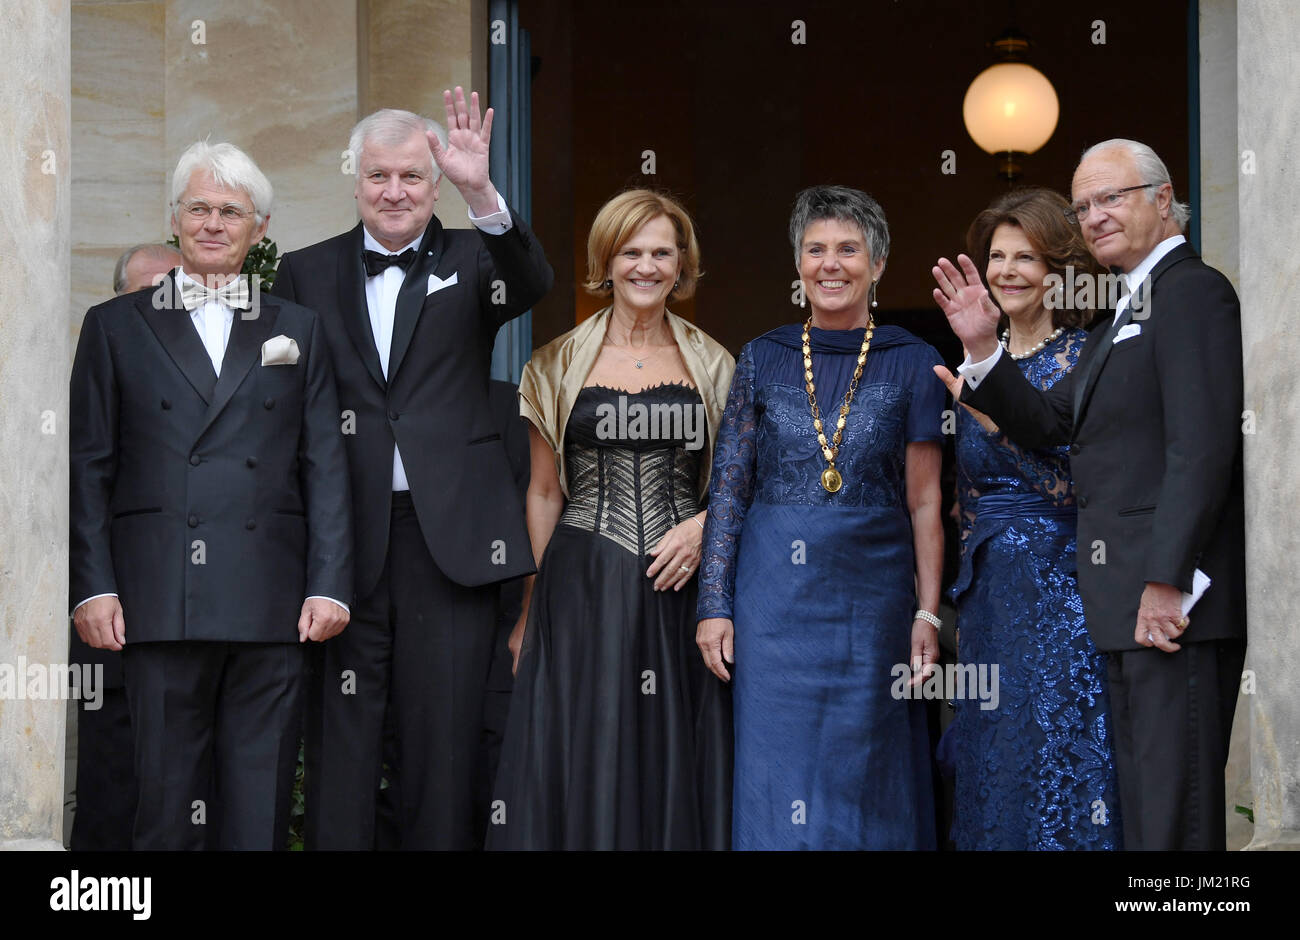 Bayreuth, Germany. 25th July, 2017. King Gustaf of Sweden (R-L), Queen Silvia of Sweden, mayoress of Bayreuth, Brigitte Merk-Erbe, Karin Seehofer - the wife of the Bavarian premier, Bavarian premier Horst Seehofer (CSU) and Thomas Erbe arrive at the opening of the Bayreuth Festival 2017 in Bayreuth, Germany, 25 July 2017. The festival opens with the opera 'Die Meistersinger von Nuernberg' (The Master-Singers of Nuremberg). Photo: Tobias Hase/dpa/Alamy Live News Stock Photo